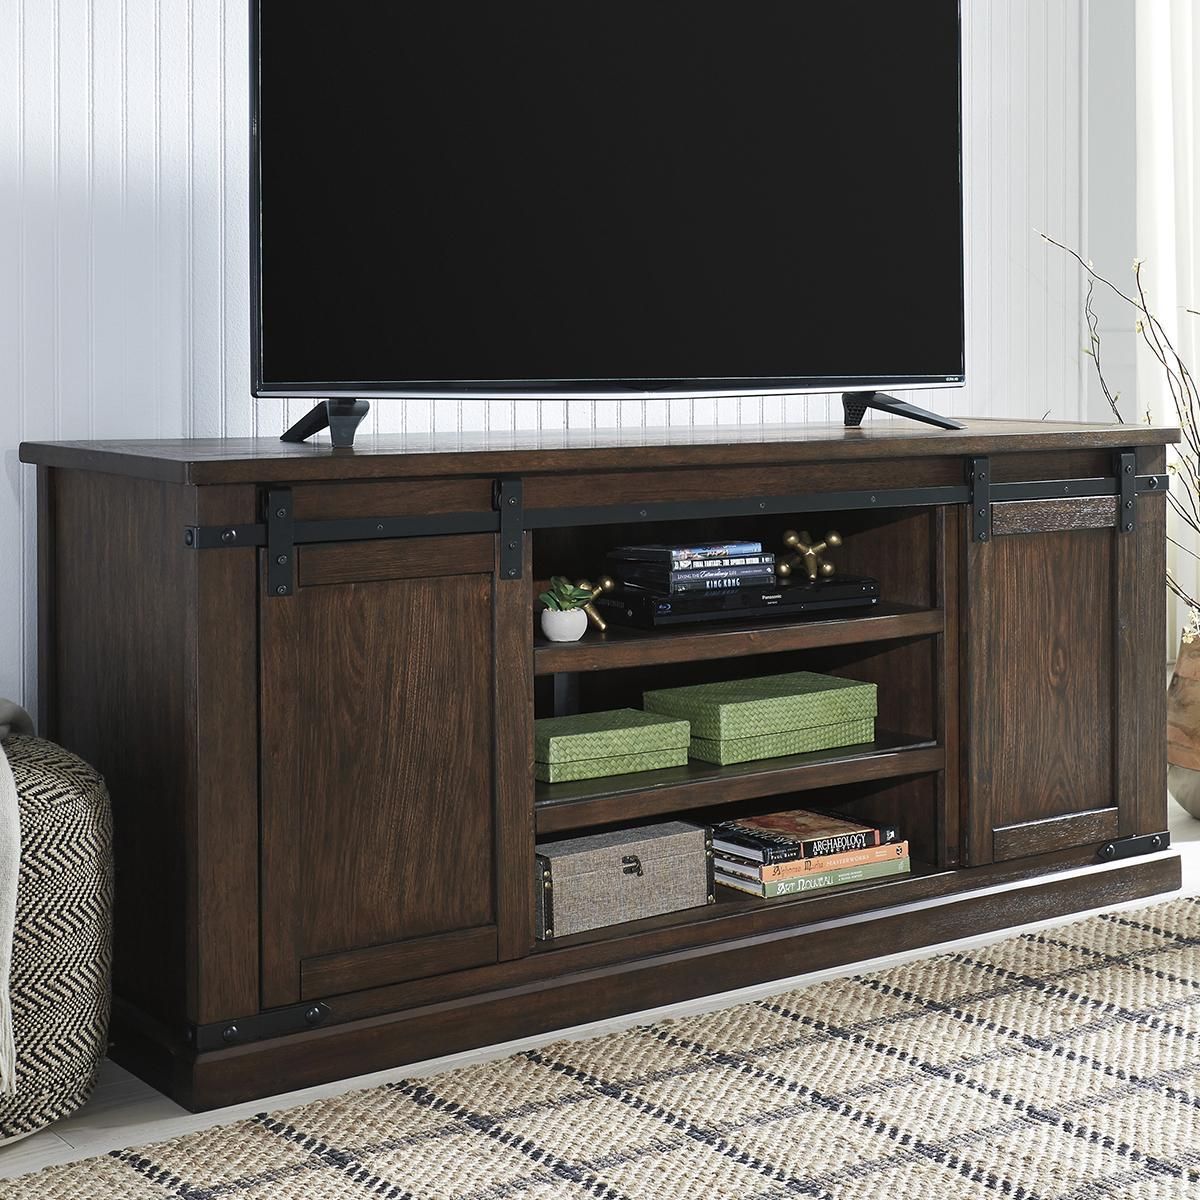 At Home Budmore Extra Large Tv Stand In Rustic Brown Inside Chromium Extra Wide Tv Unit Stands (View 1 of 15)